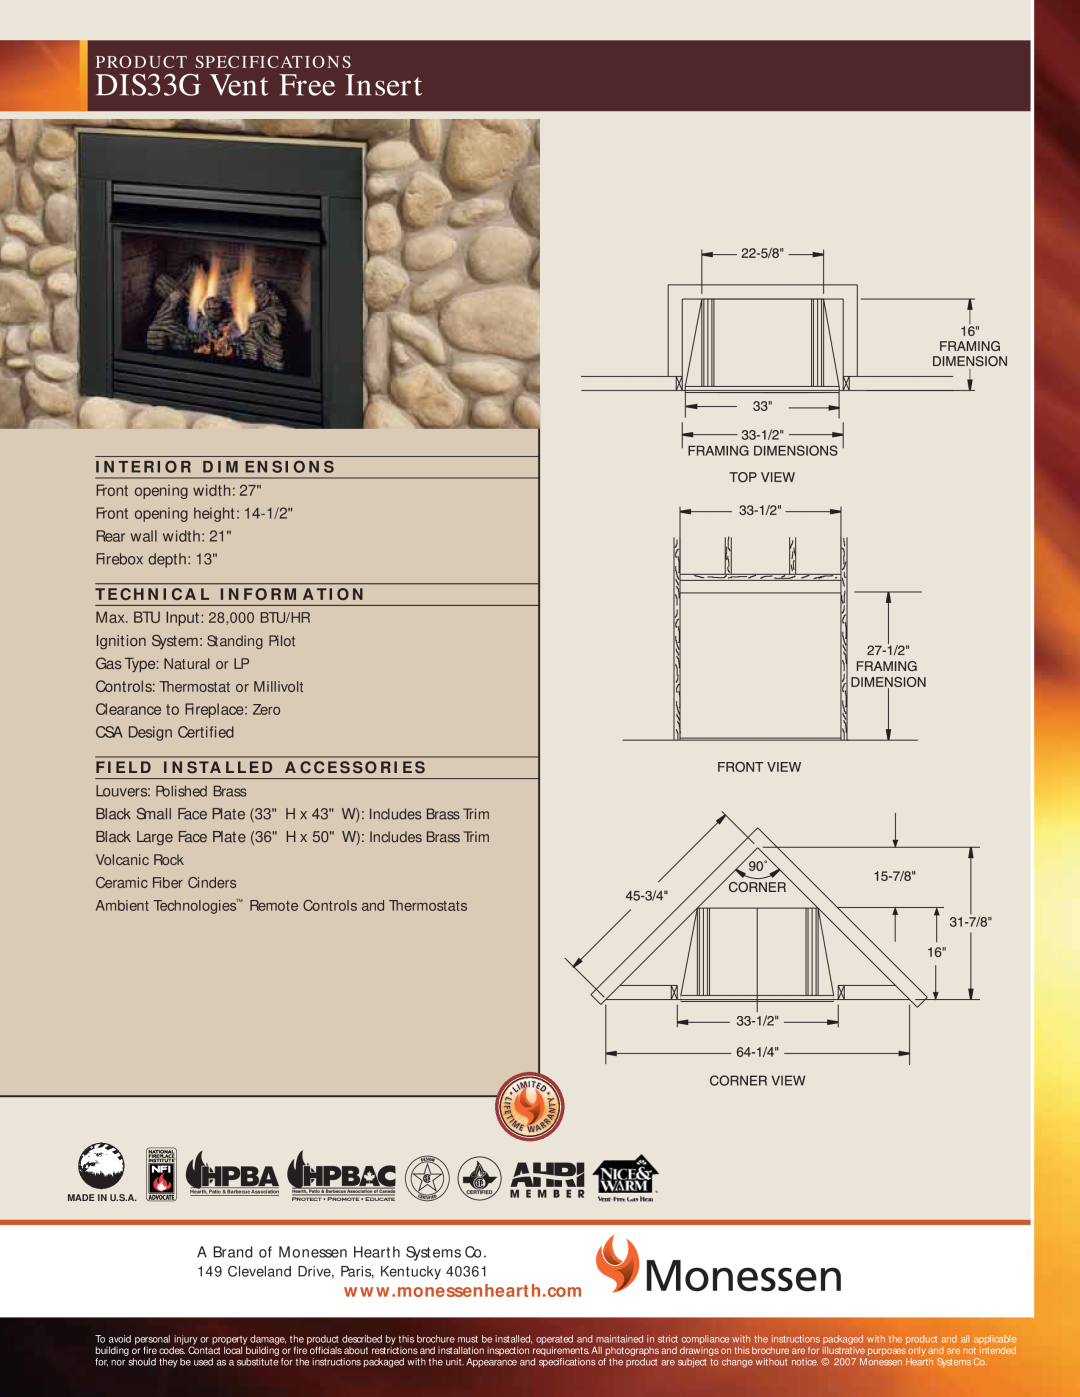 Monessen Hearth specifications DIS33G Vent Free Insert, Product Specifications 